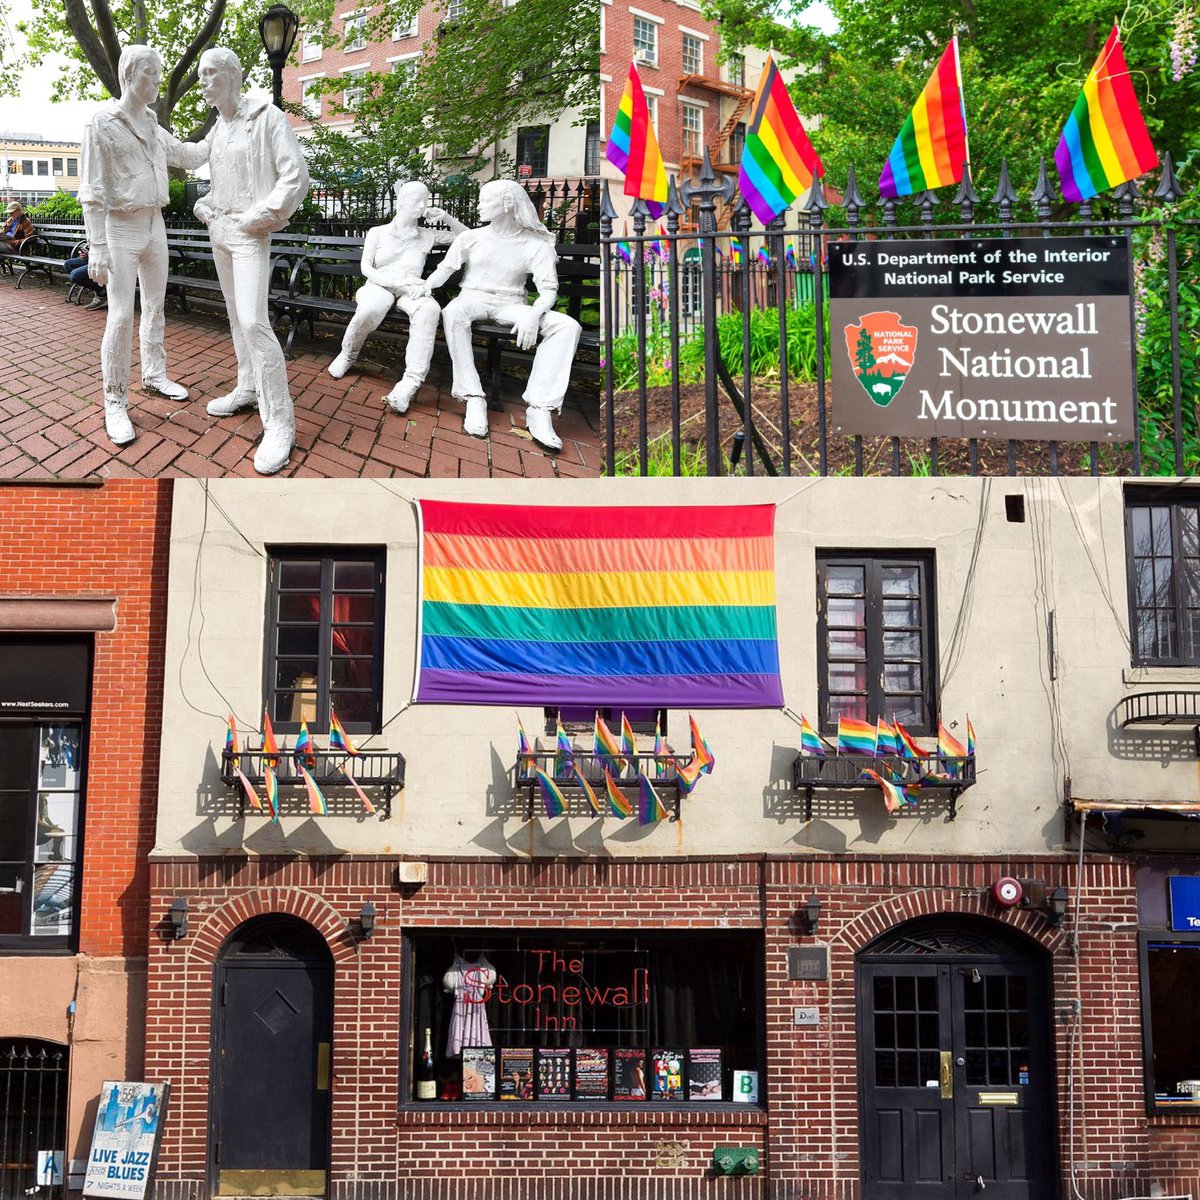 Today is the 54th Anniversary of the Stonewall Inn riots, which played a pivotal role in the fight for LGBTQ+ rights. Nassau County Human Rights Commission celebrates diversity, equity, inclusion and belonging today and every day! #stonewall #pride #EqualityForAll